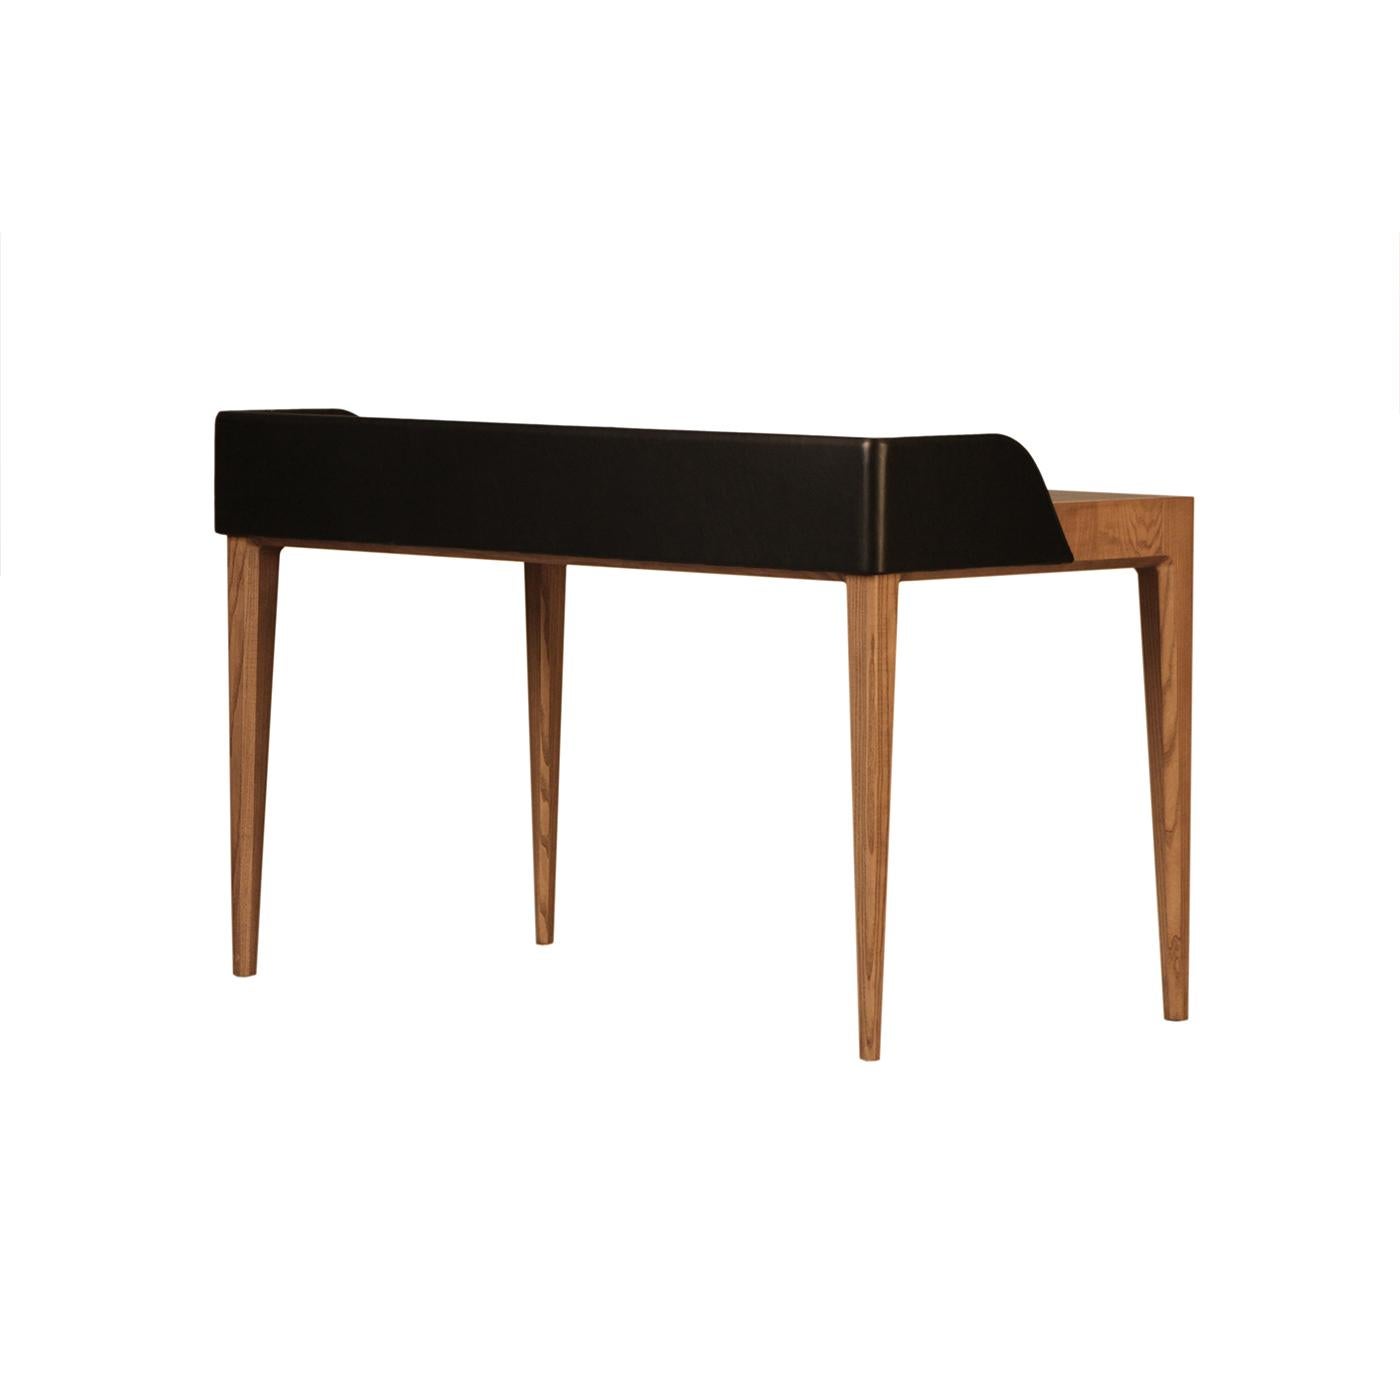 Brimming with luxe flair, this exceptional desk will be a mesmerizing addition to contemporary decors. The durmast-finished ash wood frame comprises four tapered, slender legs sustaining a parallepiped-like table top upholstered with prized leather.